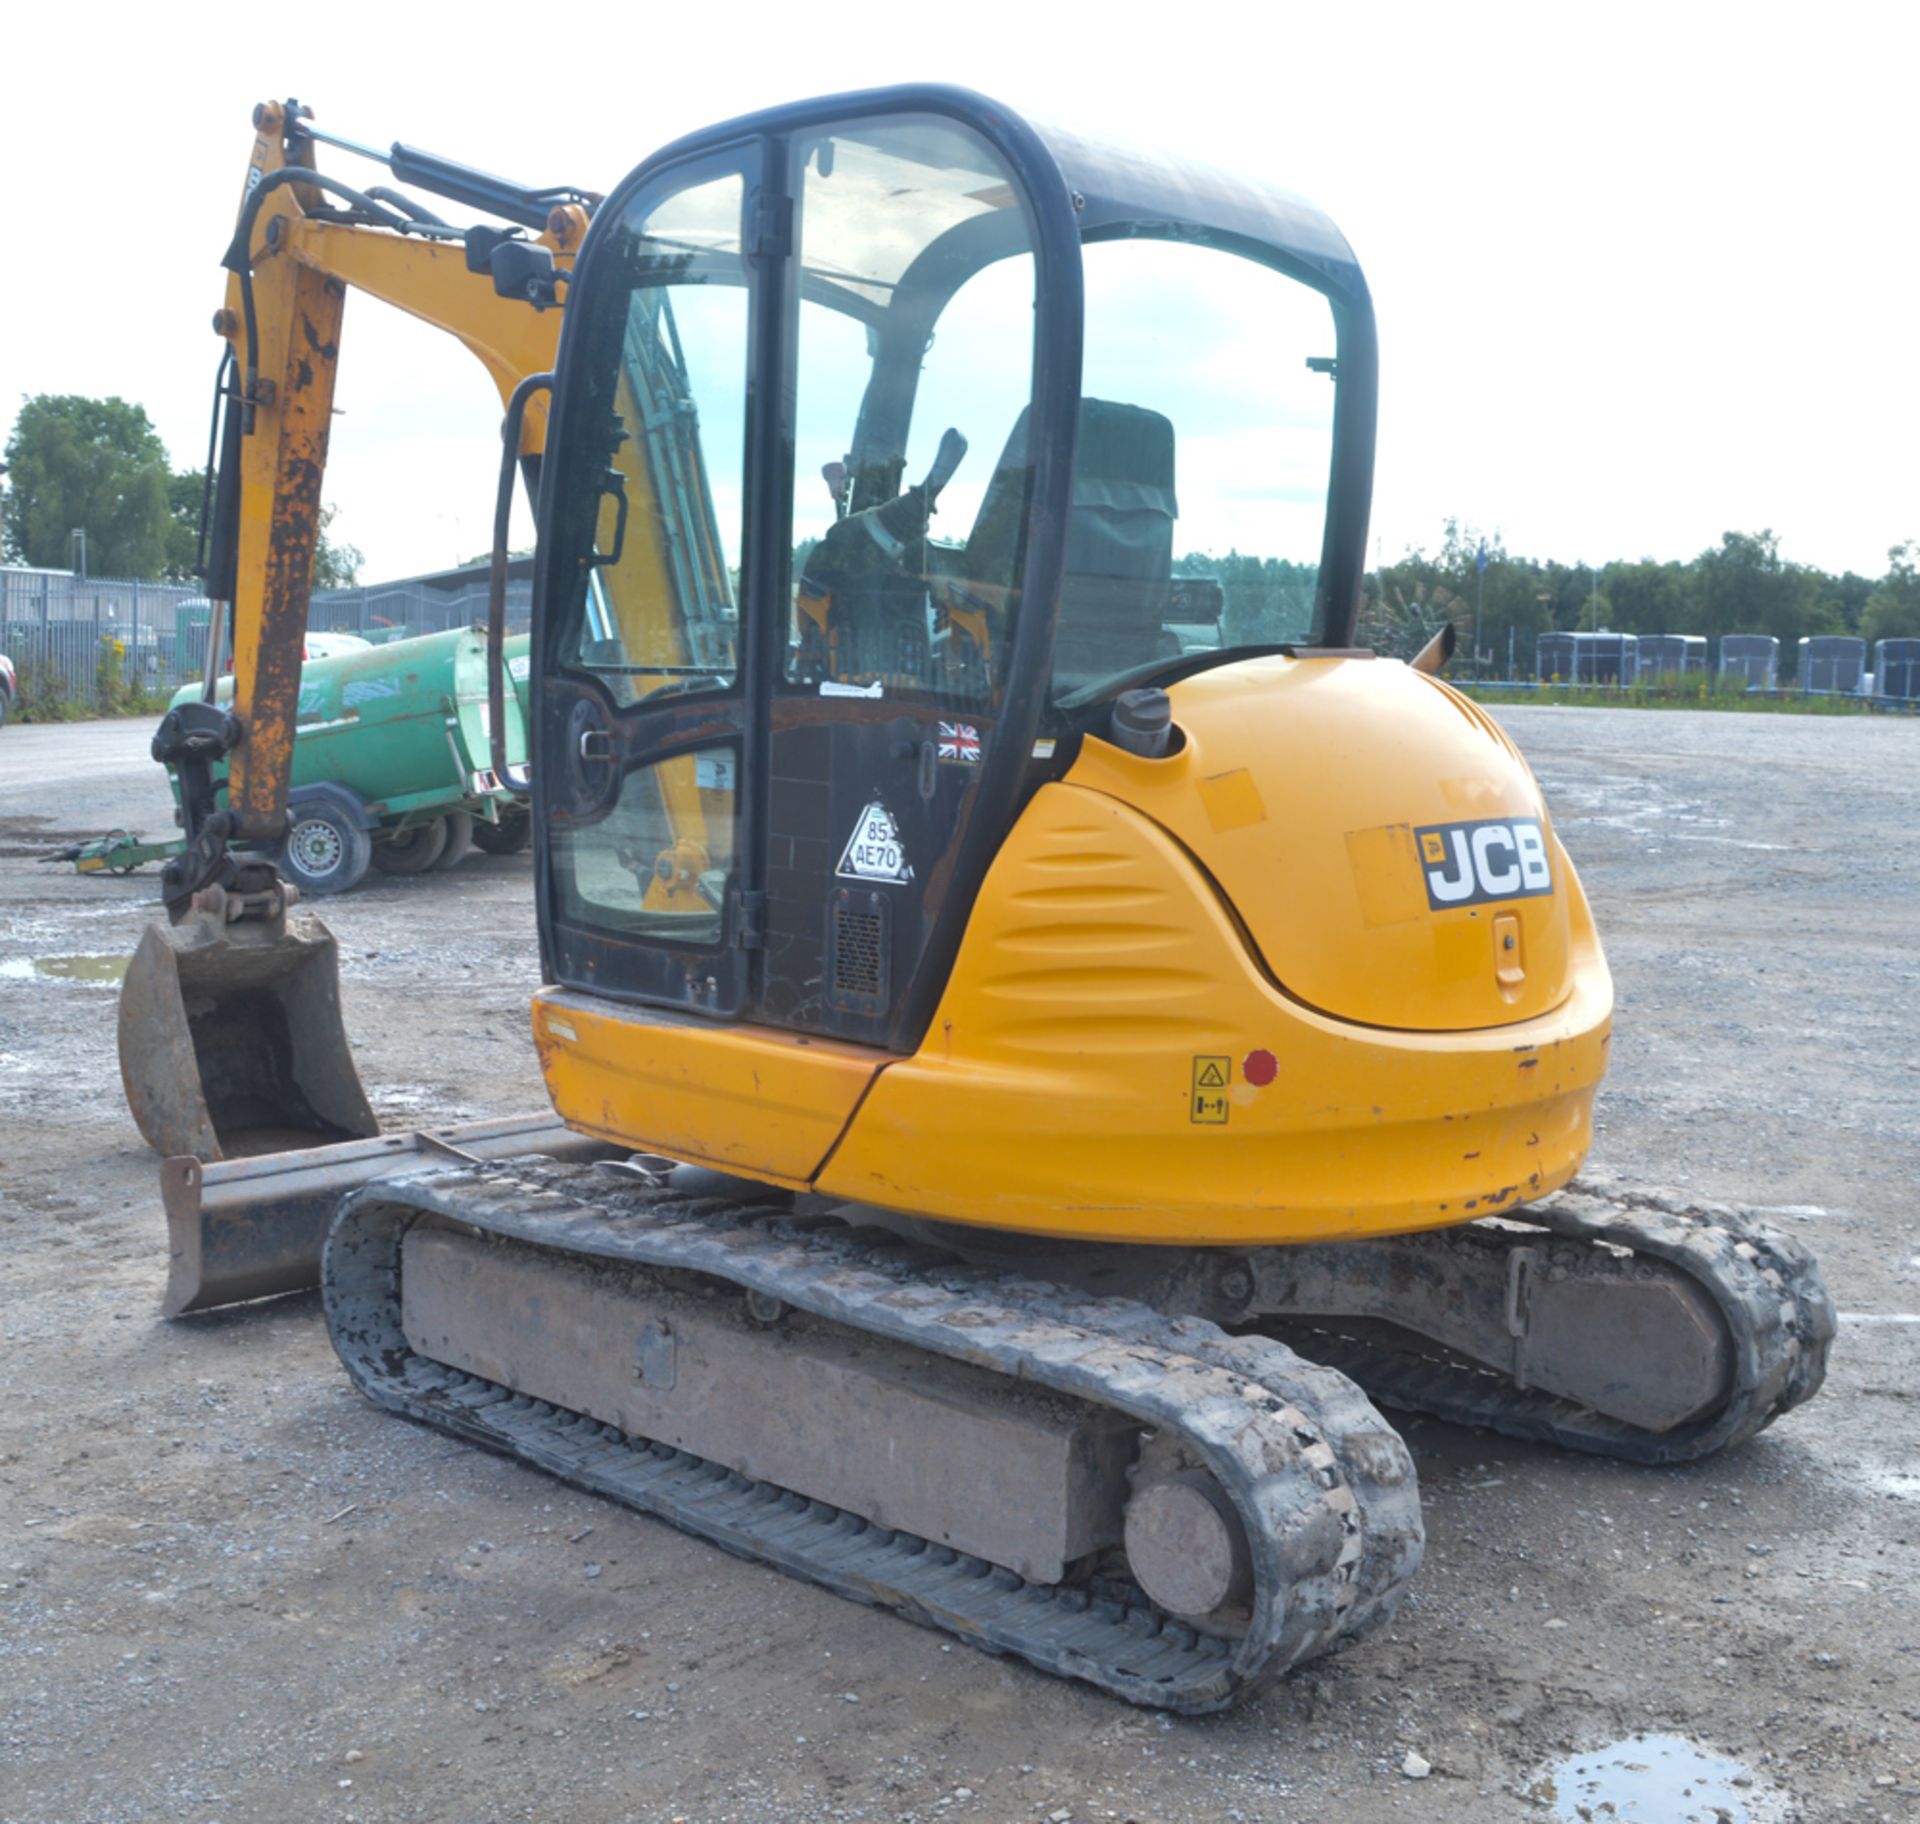 JCB 8050 RTS 5 tonne rubber tracked excavator  Year: 2011 S/N: 01741645 Recorded hours: 2052 - Image 4 of 11